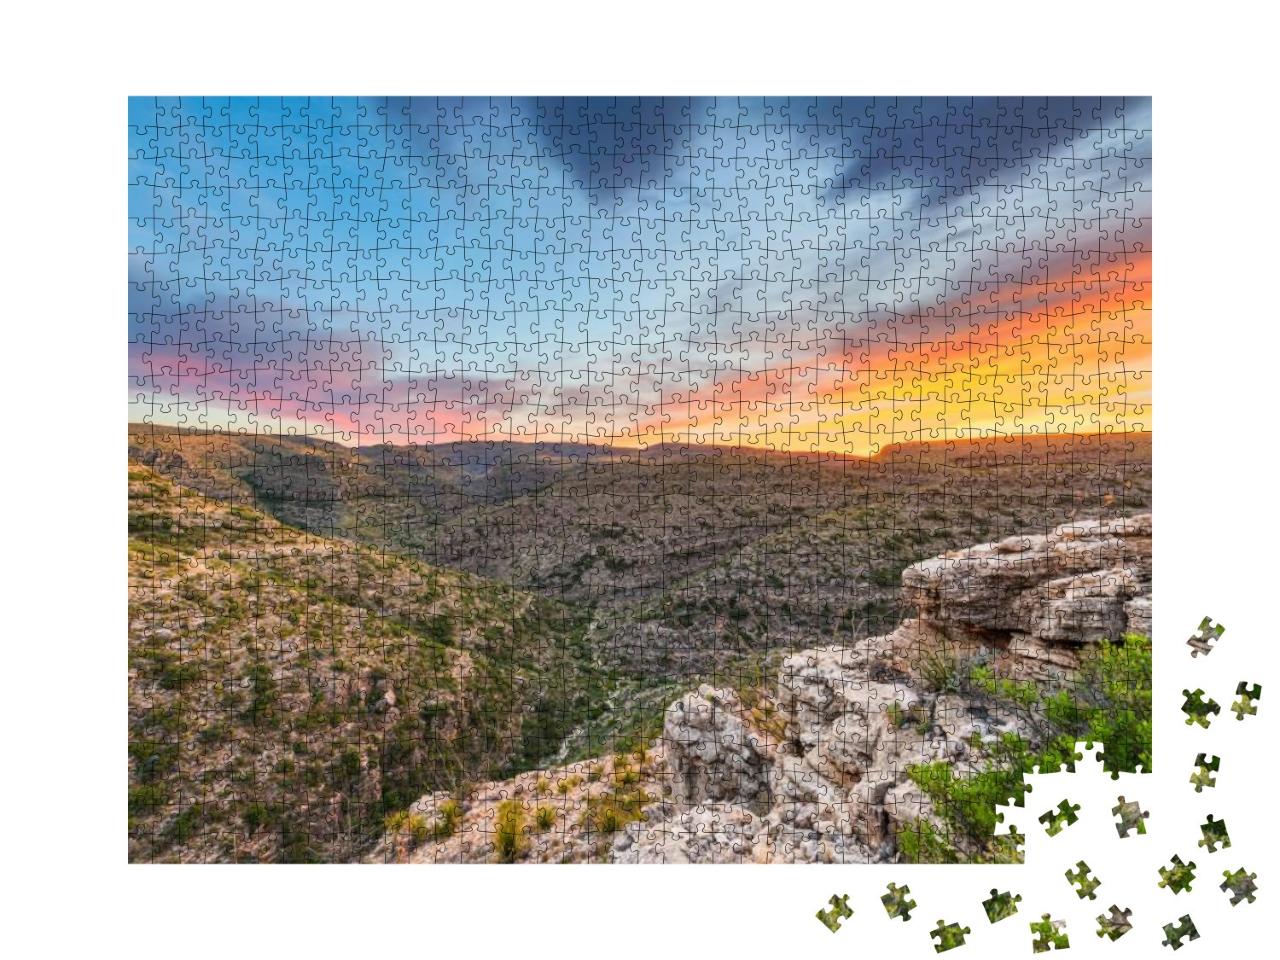 Carlsbad Cavern National Park, New Mexico, USA Overlooking... Jigsaw Puzzle with 1000 pieces